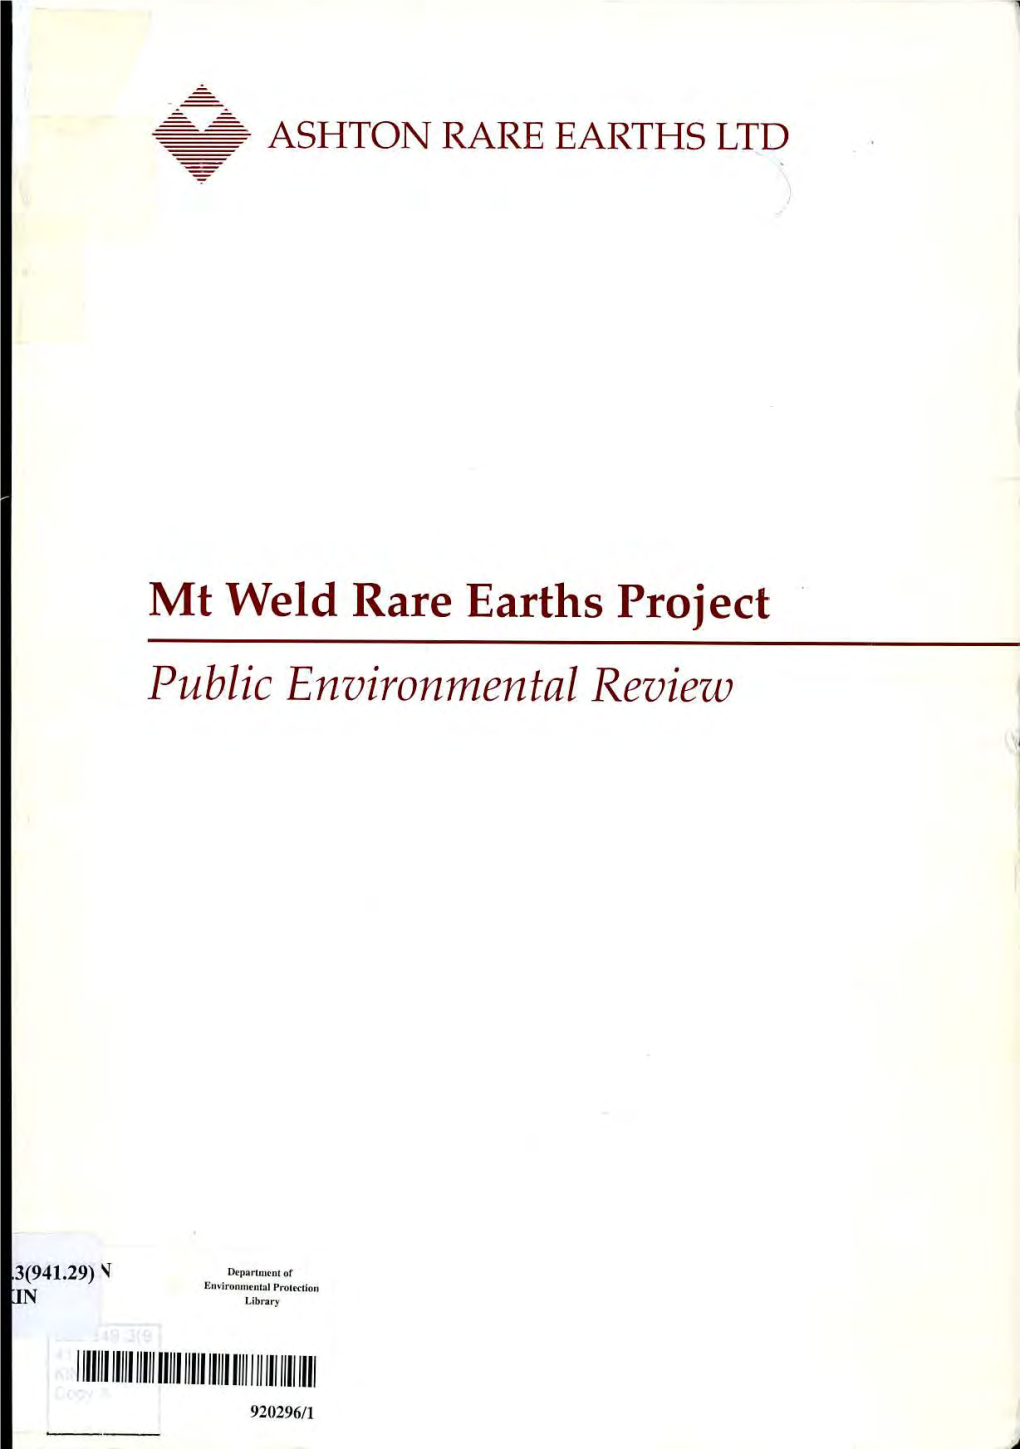 Mt Weld Rare Earths Project Public Environmental Review